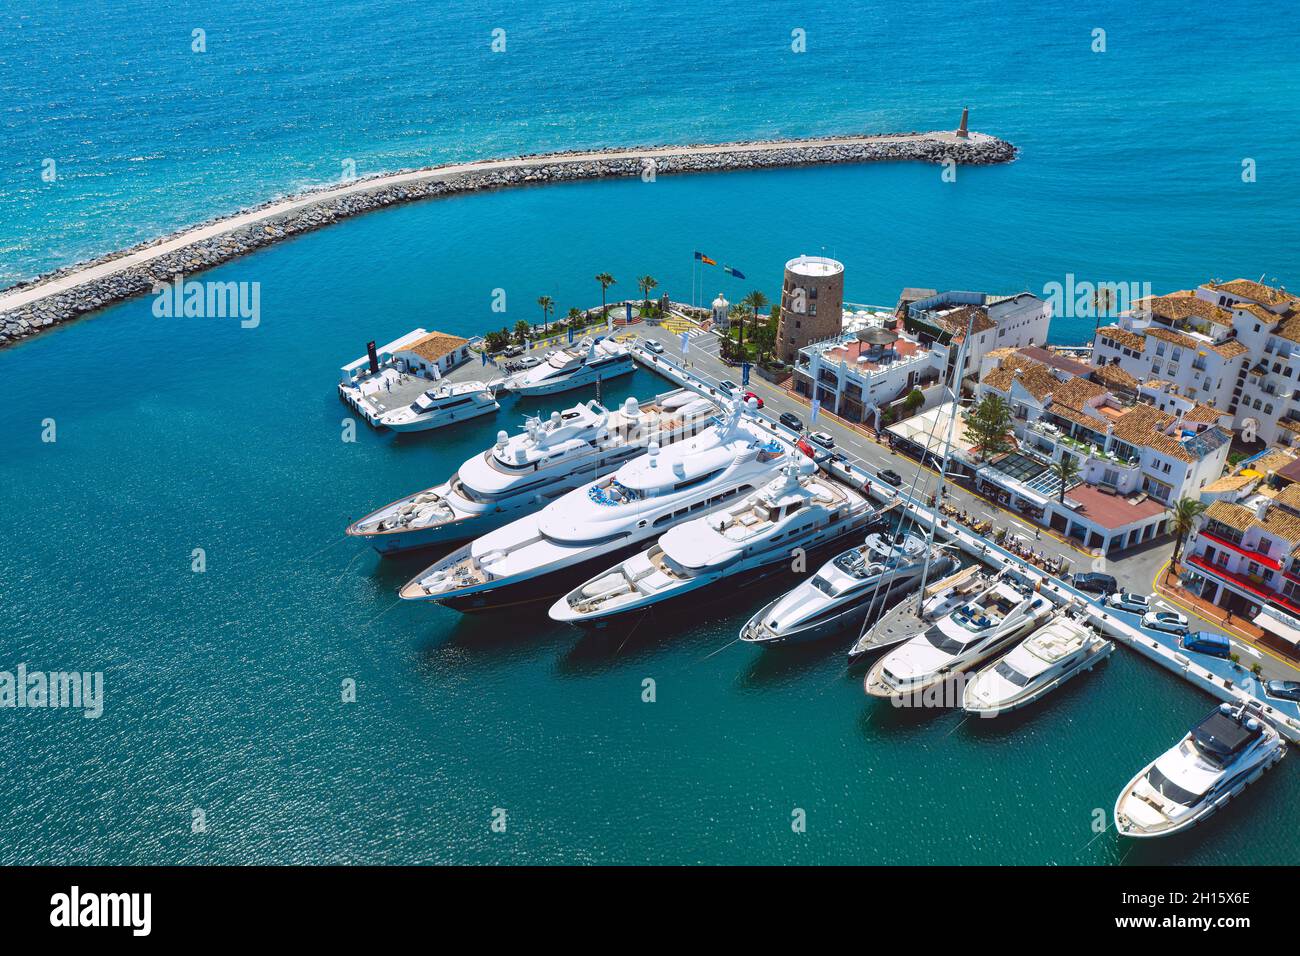 Marbella's Puerto Banus now most expensive port in Europe after HUGE 20%  hike in mooring costs - Olive Press News Spain